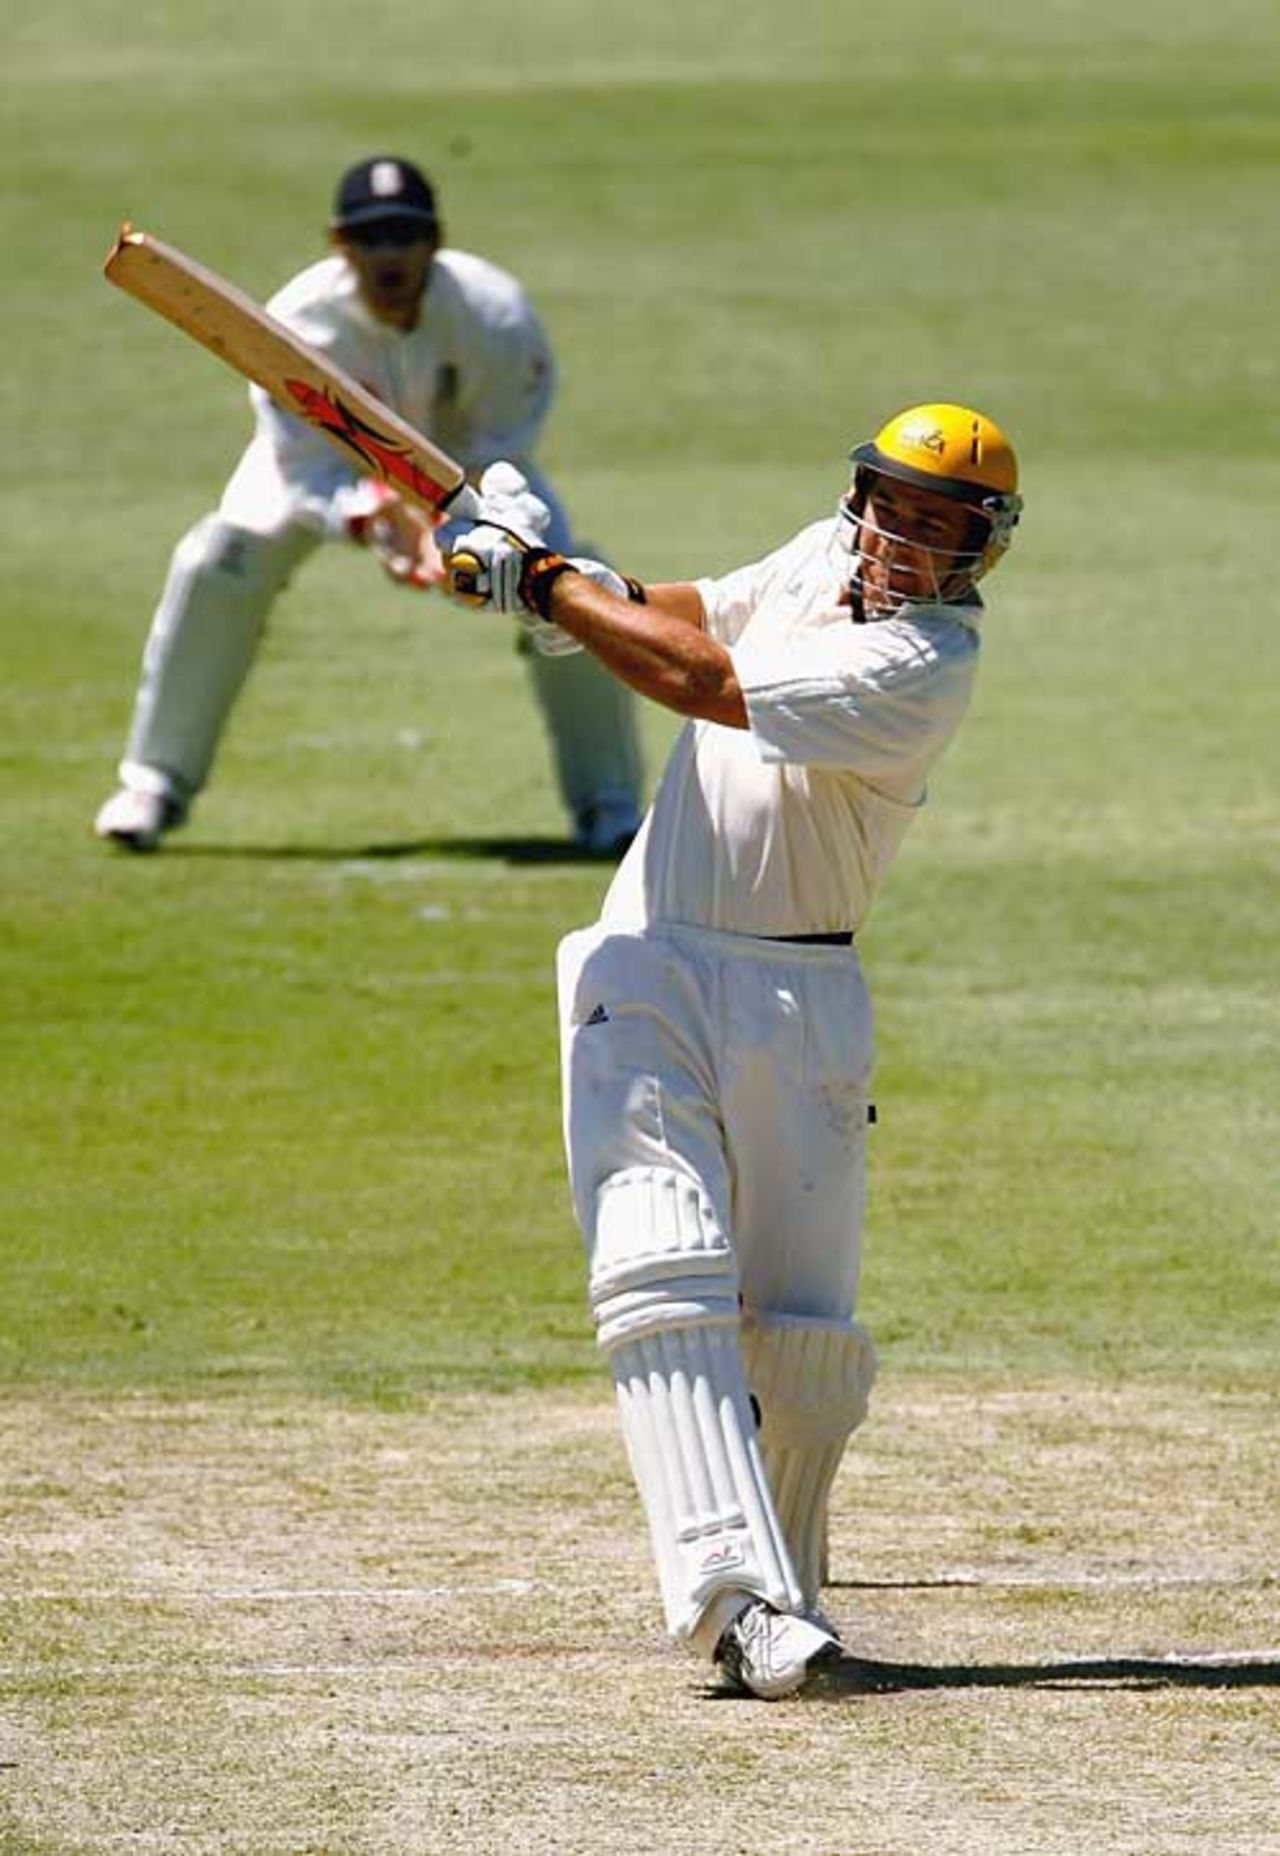 Luke Pomersbach slams another boundary to frustrate the England attack, Western Australia v England XI, Perth, December 9, 2006